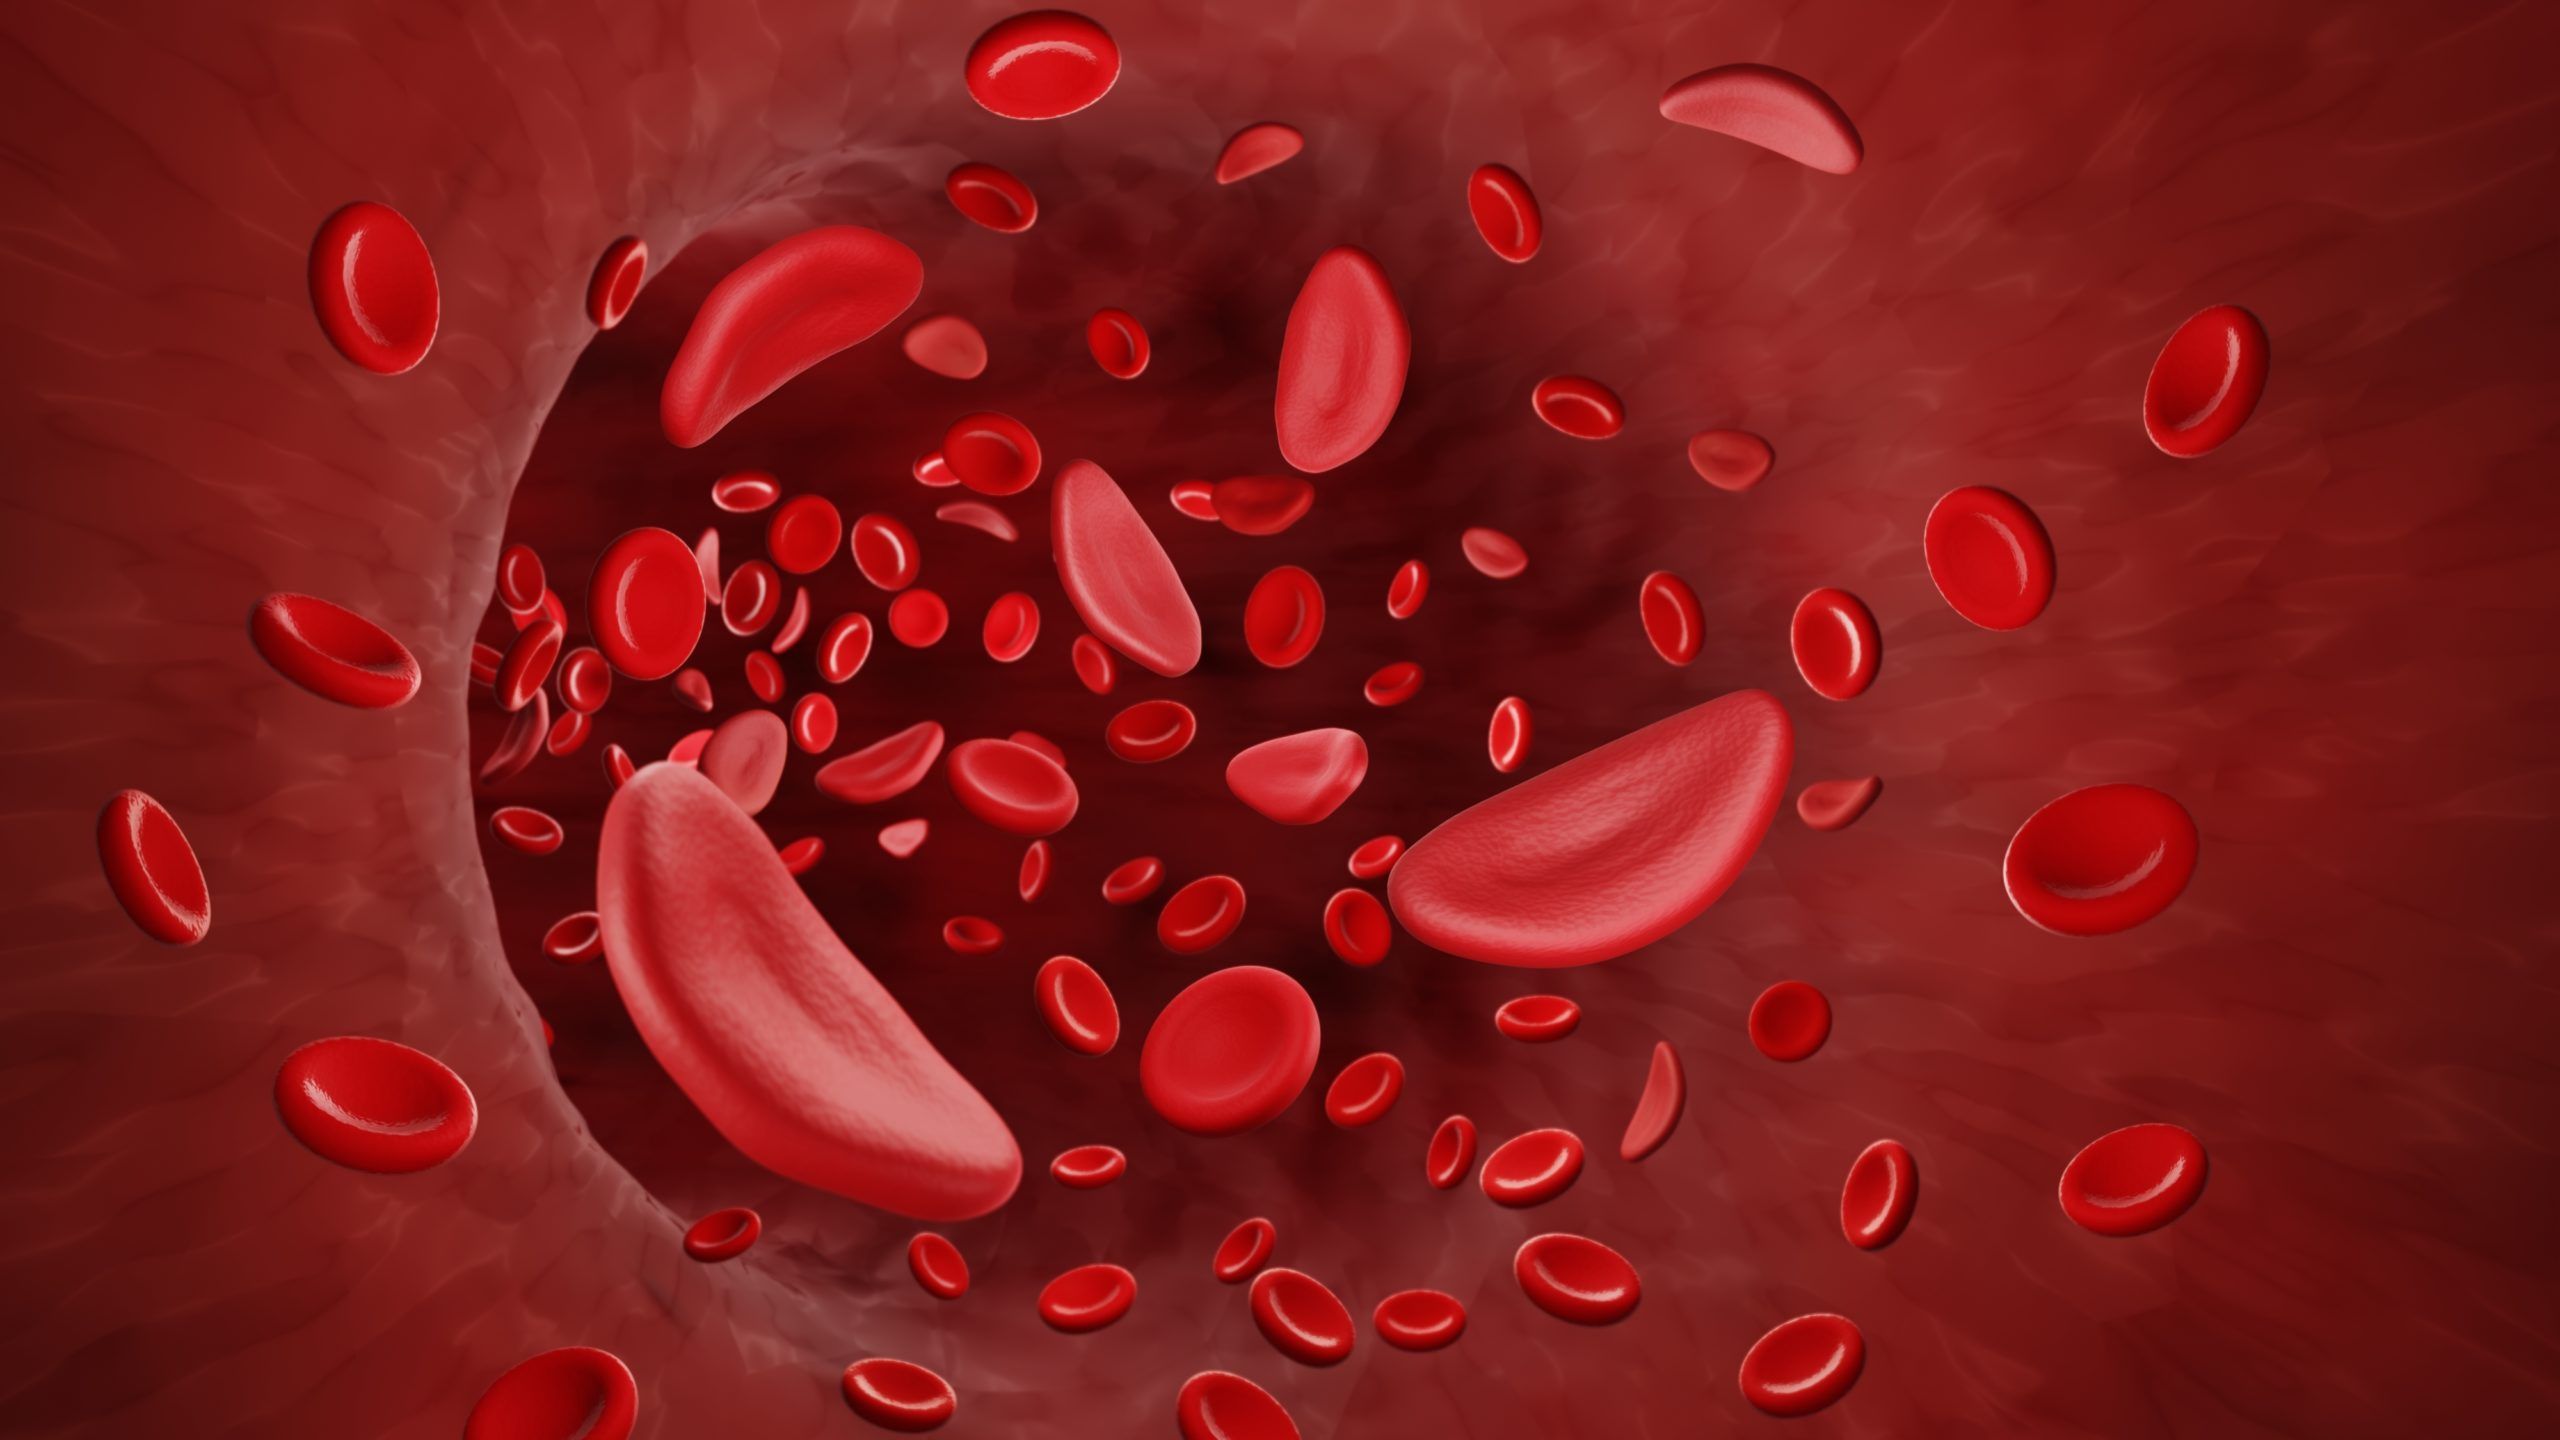 Etavopivat Improves Anemia and Hemolysis in Sickle Cell Disease